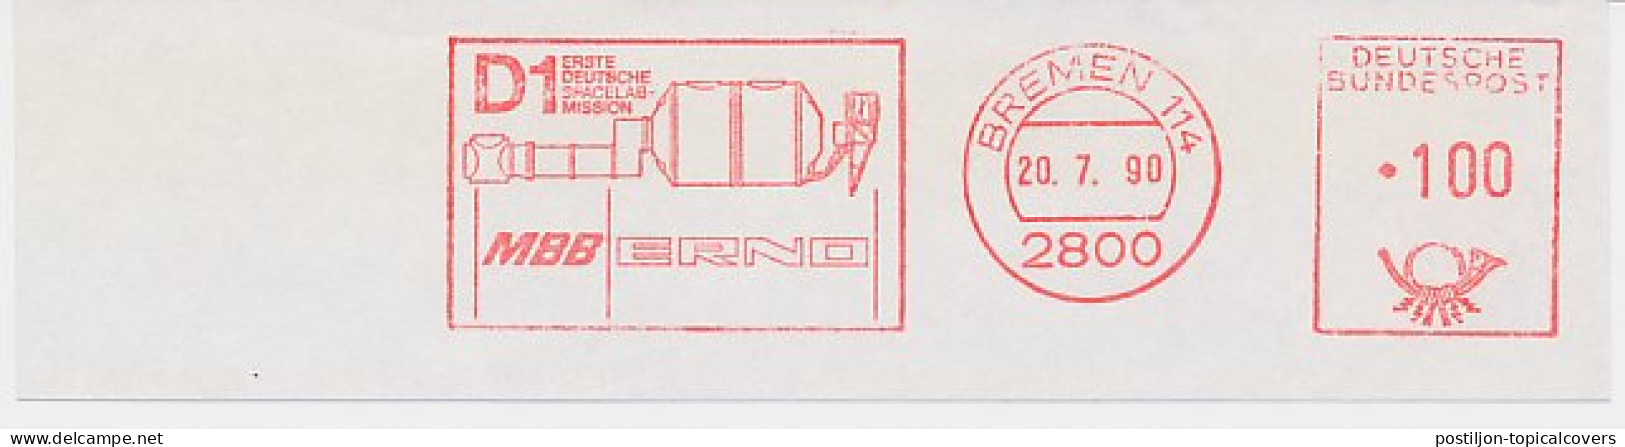 Meter Cut Germany 1990 D1 - First German Spacelab Mission - Astronomy